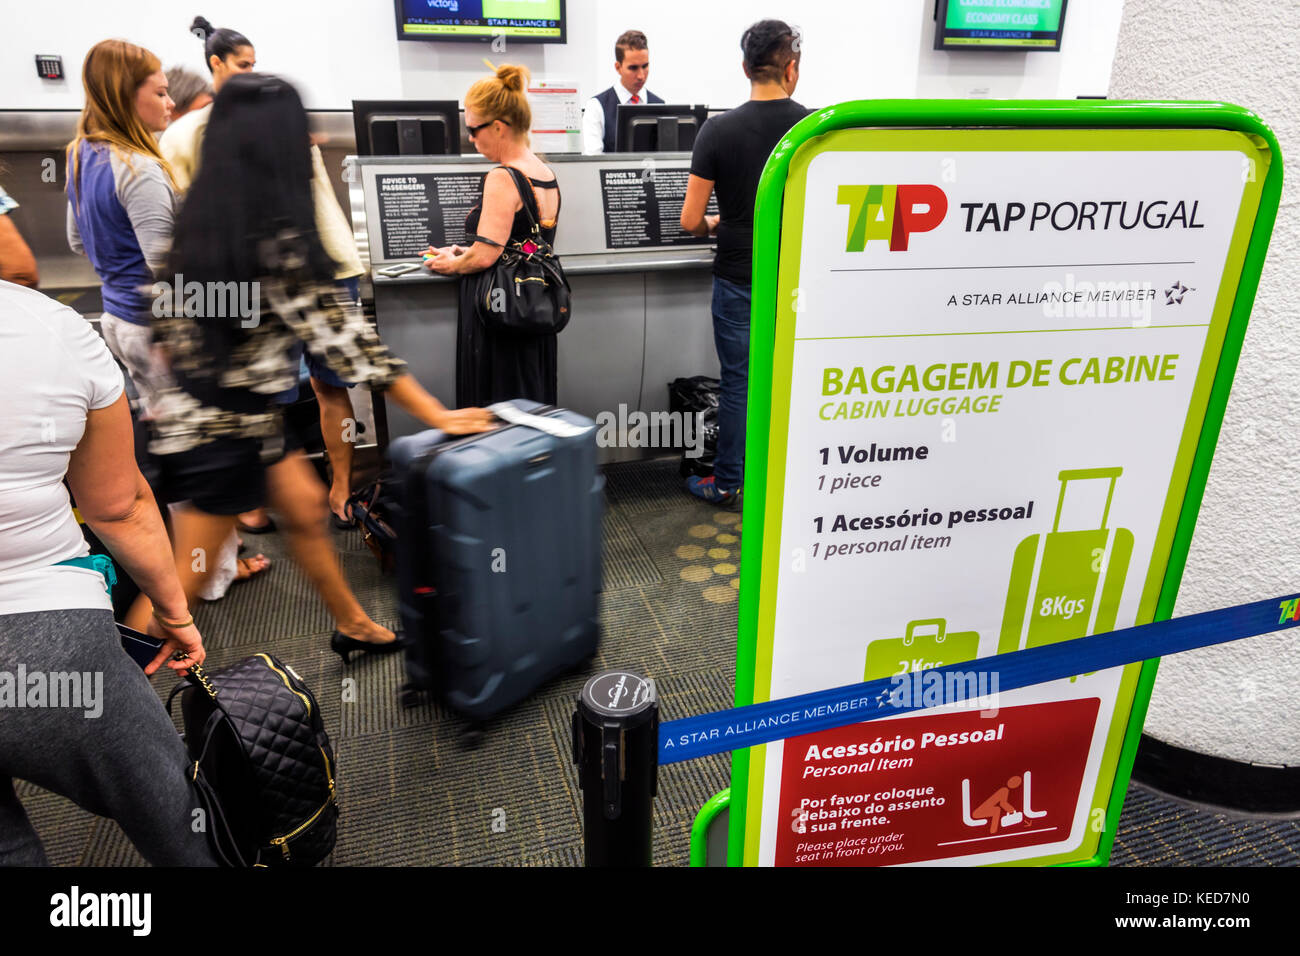 tap portugal luggage allowance , Up to 67% OFF,antalyarentacarservisi.com